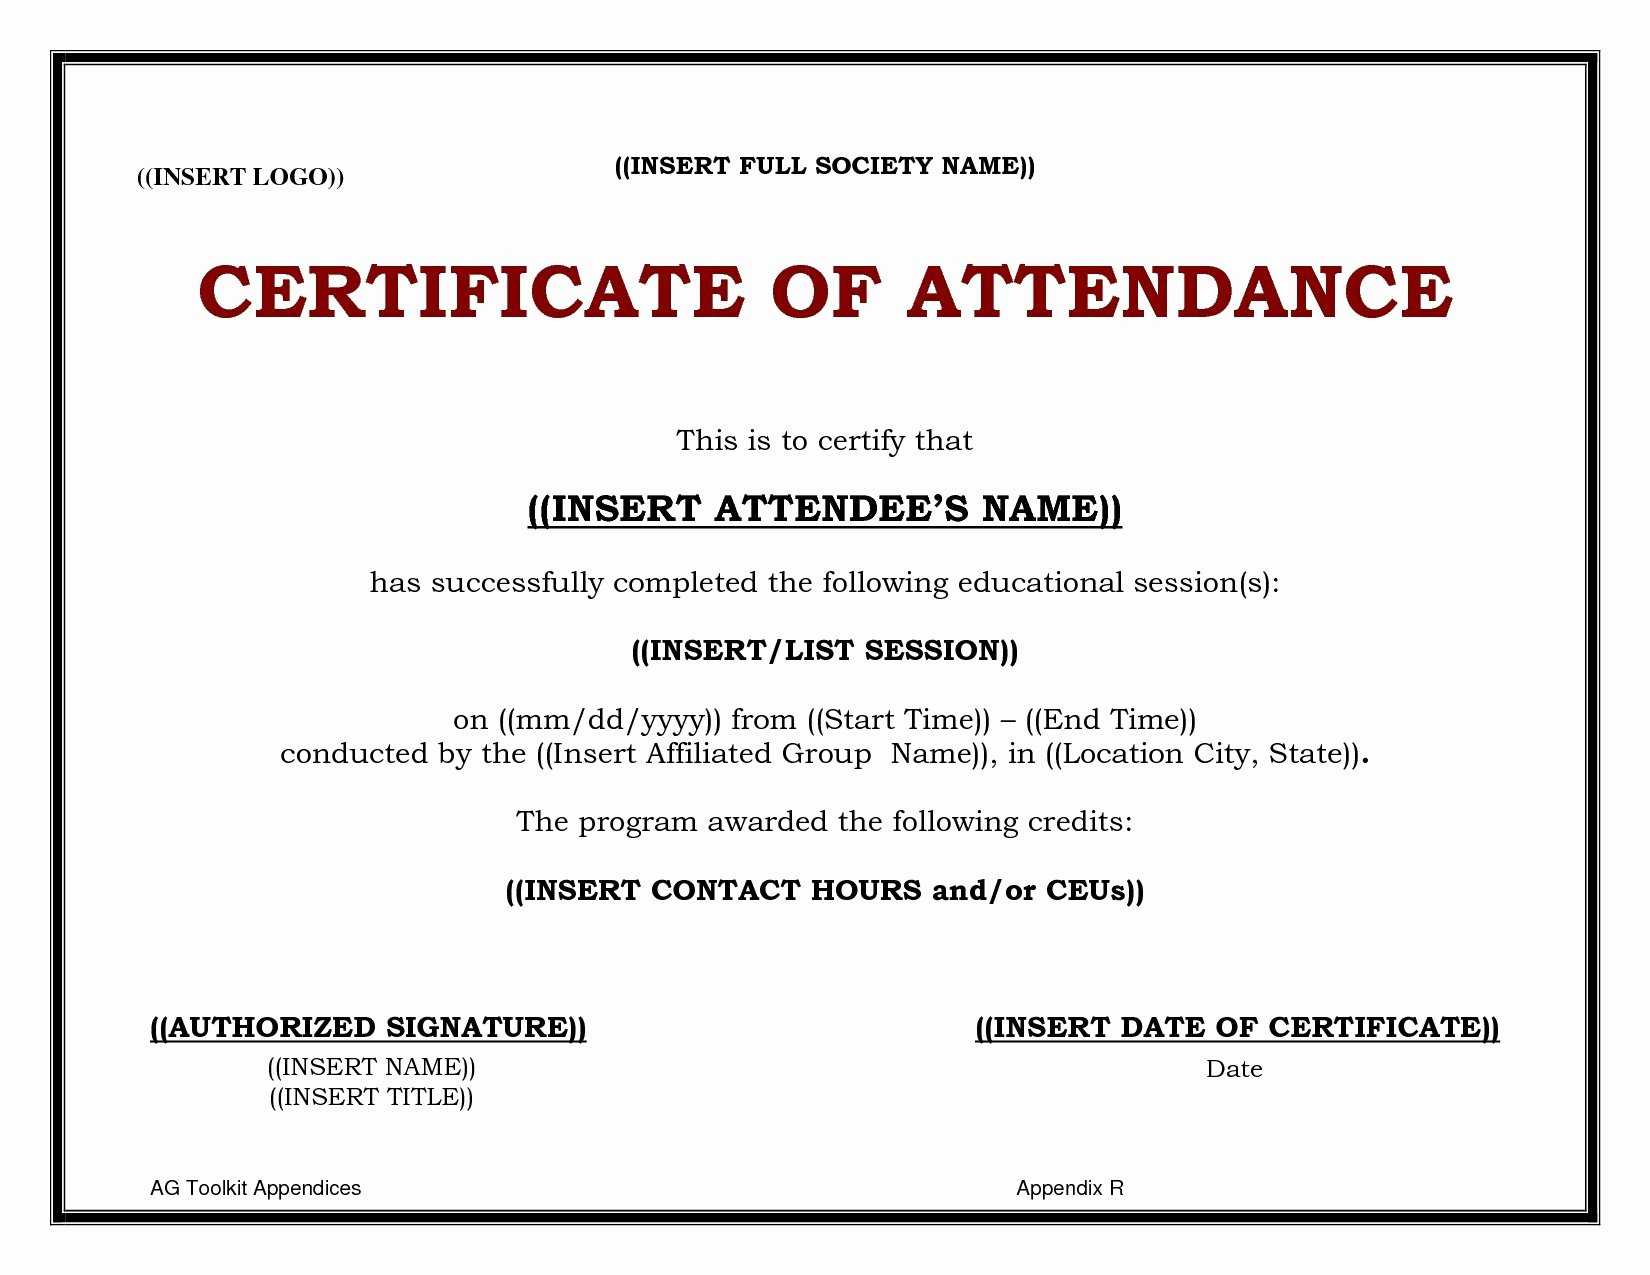 30 Ceu Certificate Of Attendance Template | Pryncepality Intended For Conference Participation Certificate Template